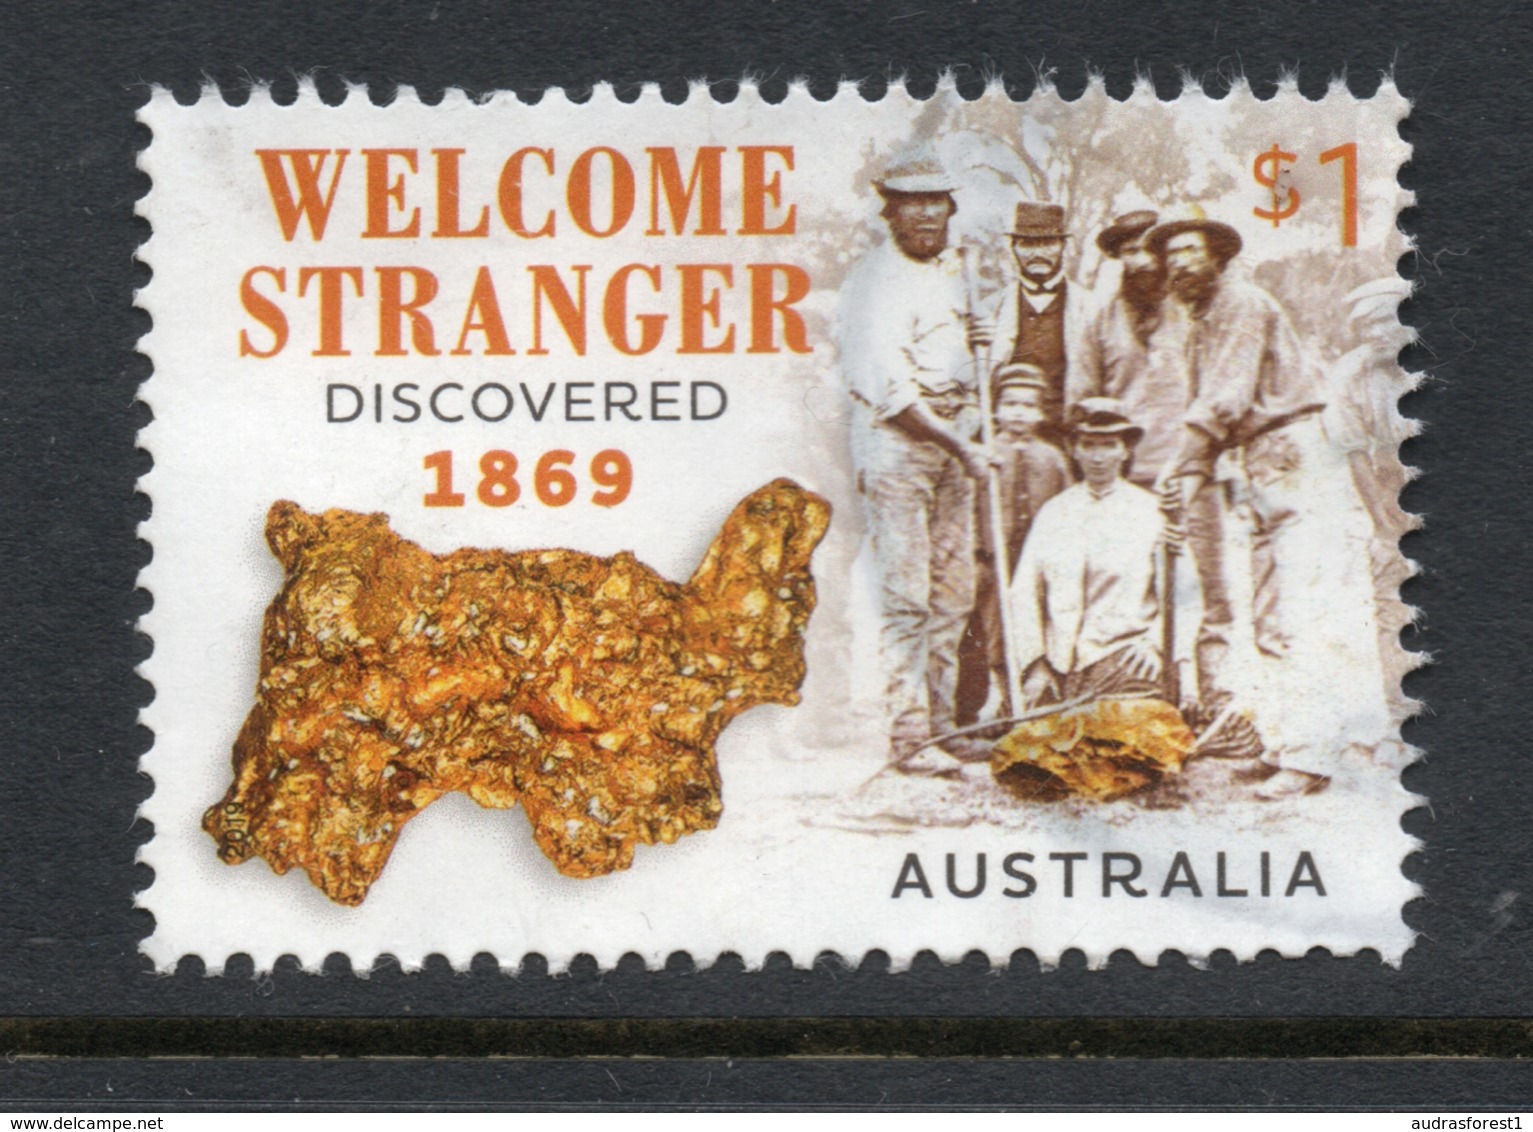 2019 AUSTRALIA GOLD Nugget WELCOME STRANGER VERY FINE POSTALLY USED SHEET STAMP - Used Stamps